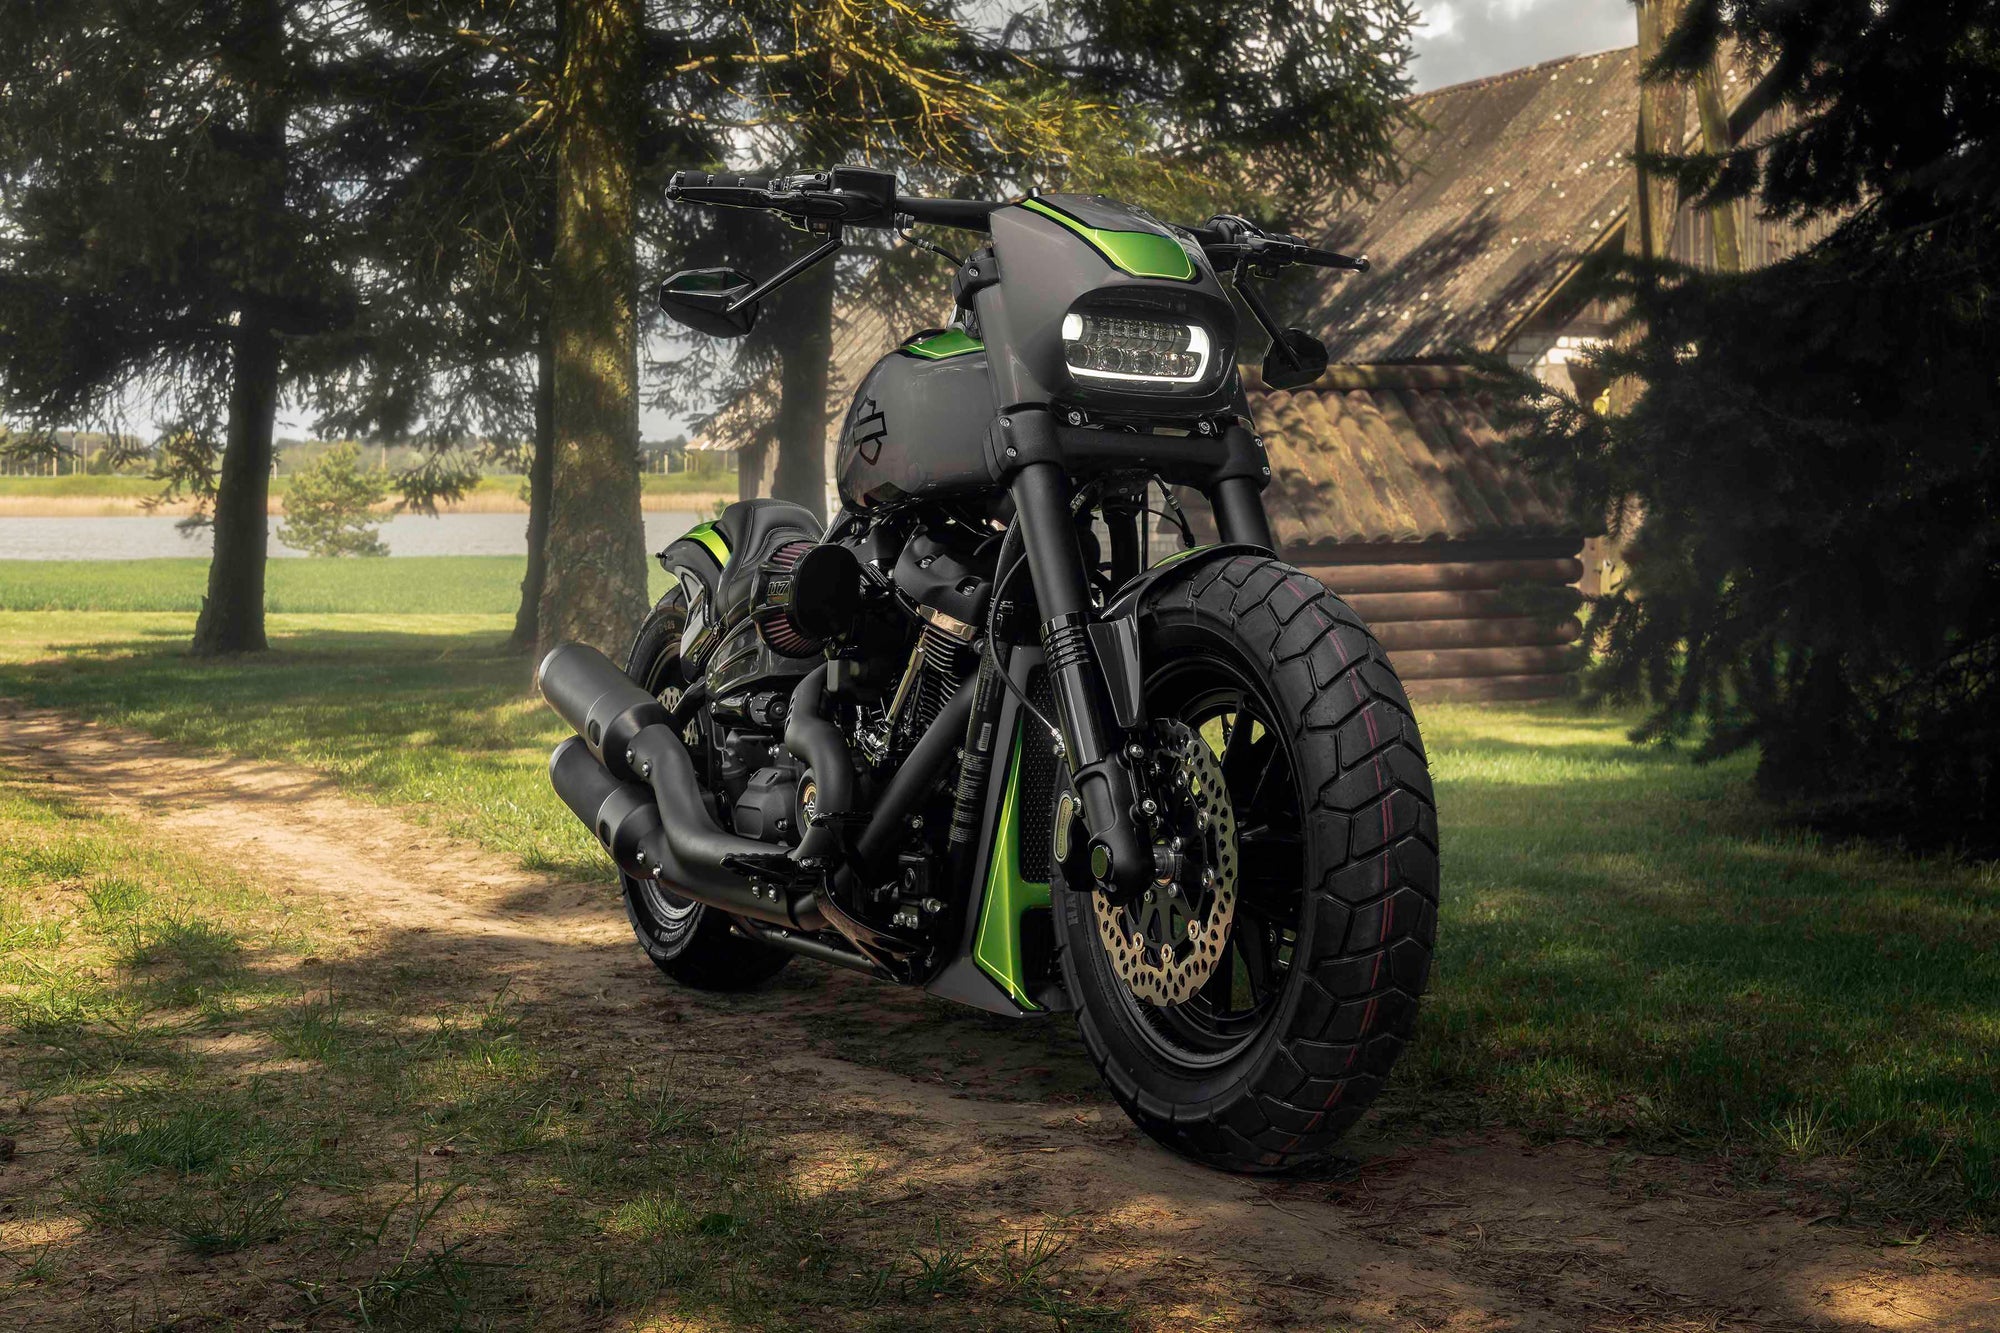 Modified Harley Davidson Fat Bob motorcycle with Killer Custom parts from the front with a country house and some trees in the background